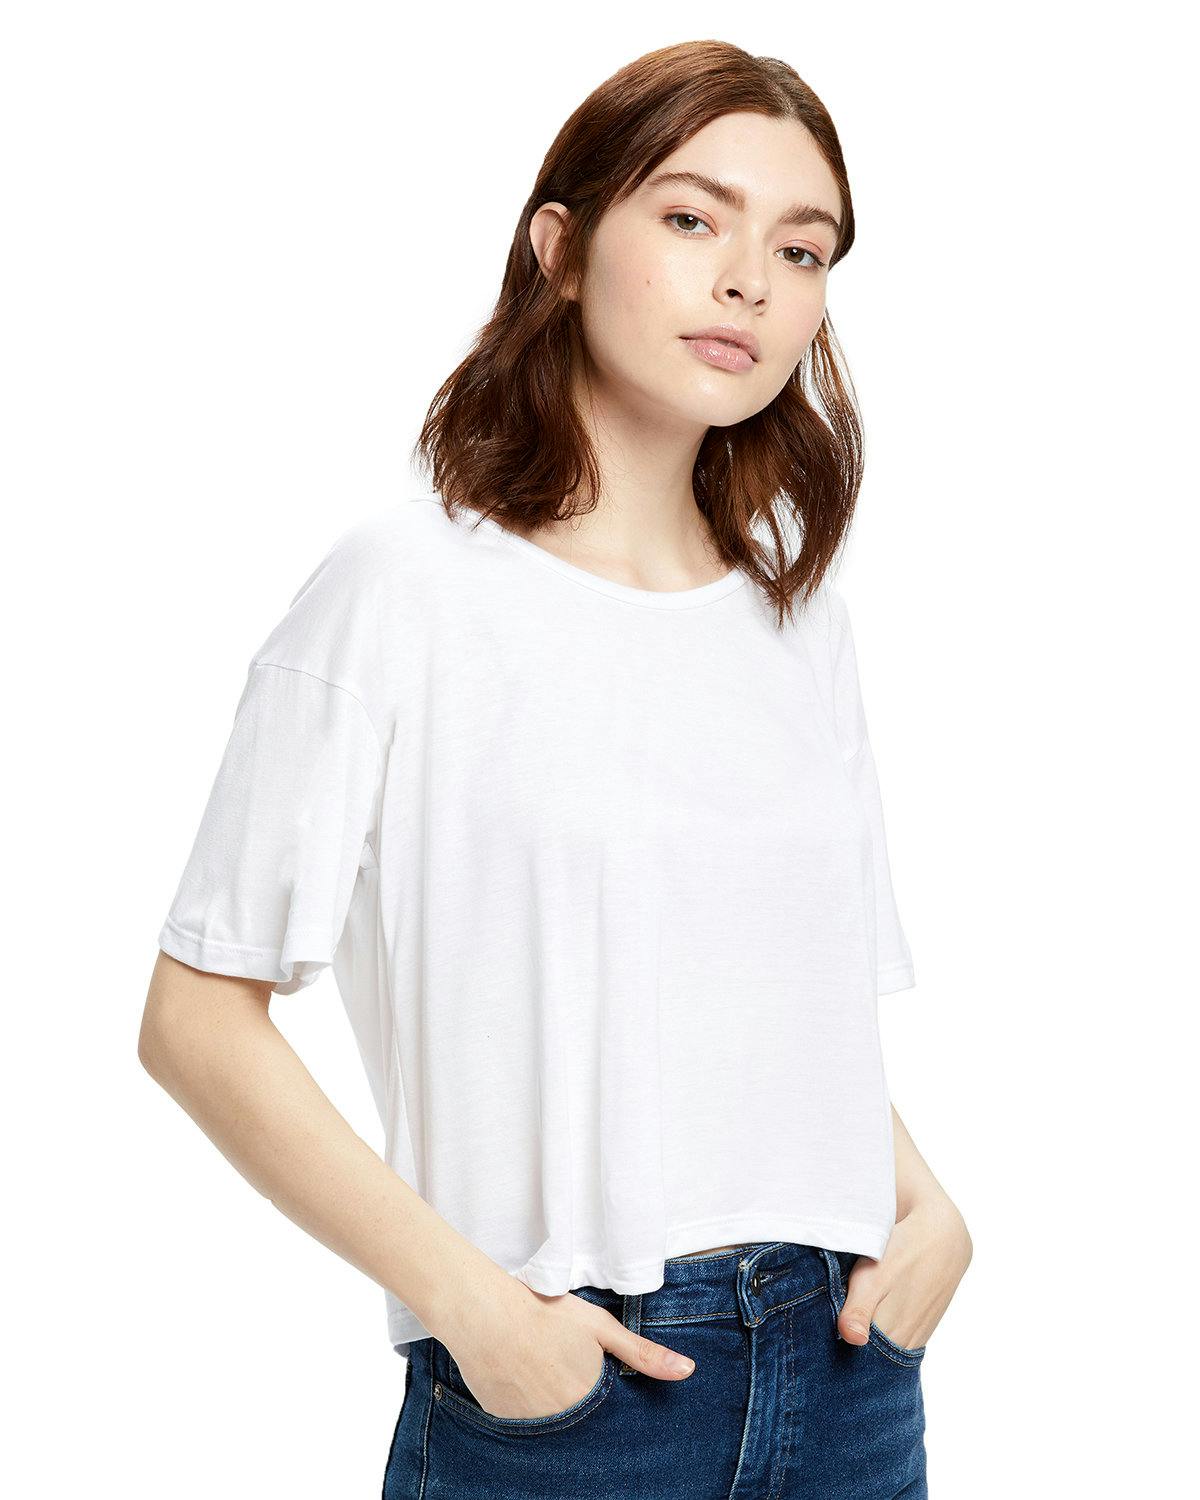 Image for Ladies' Boxy Open Neck Top